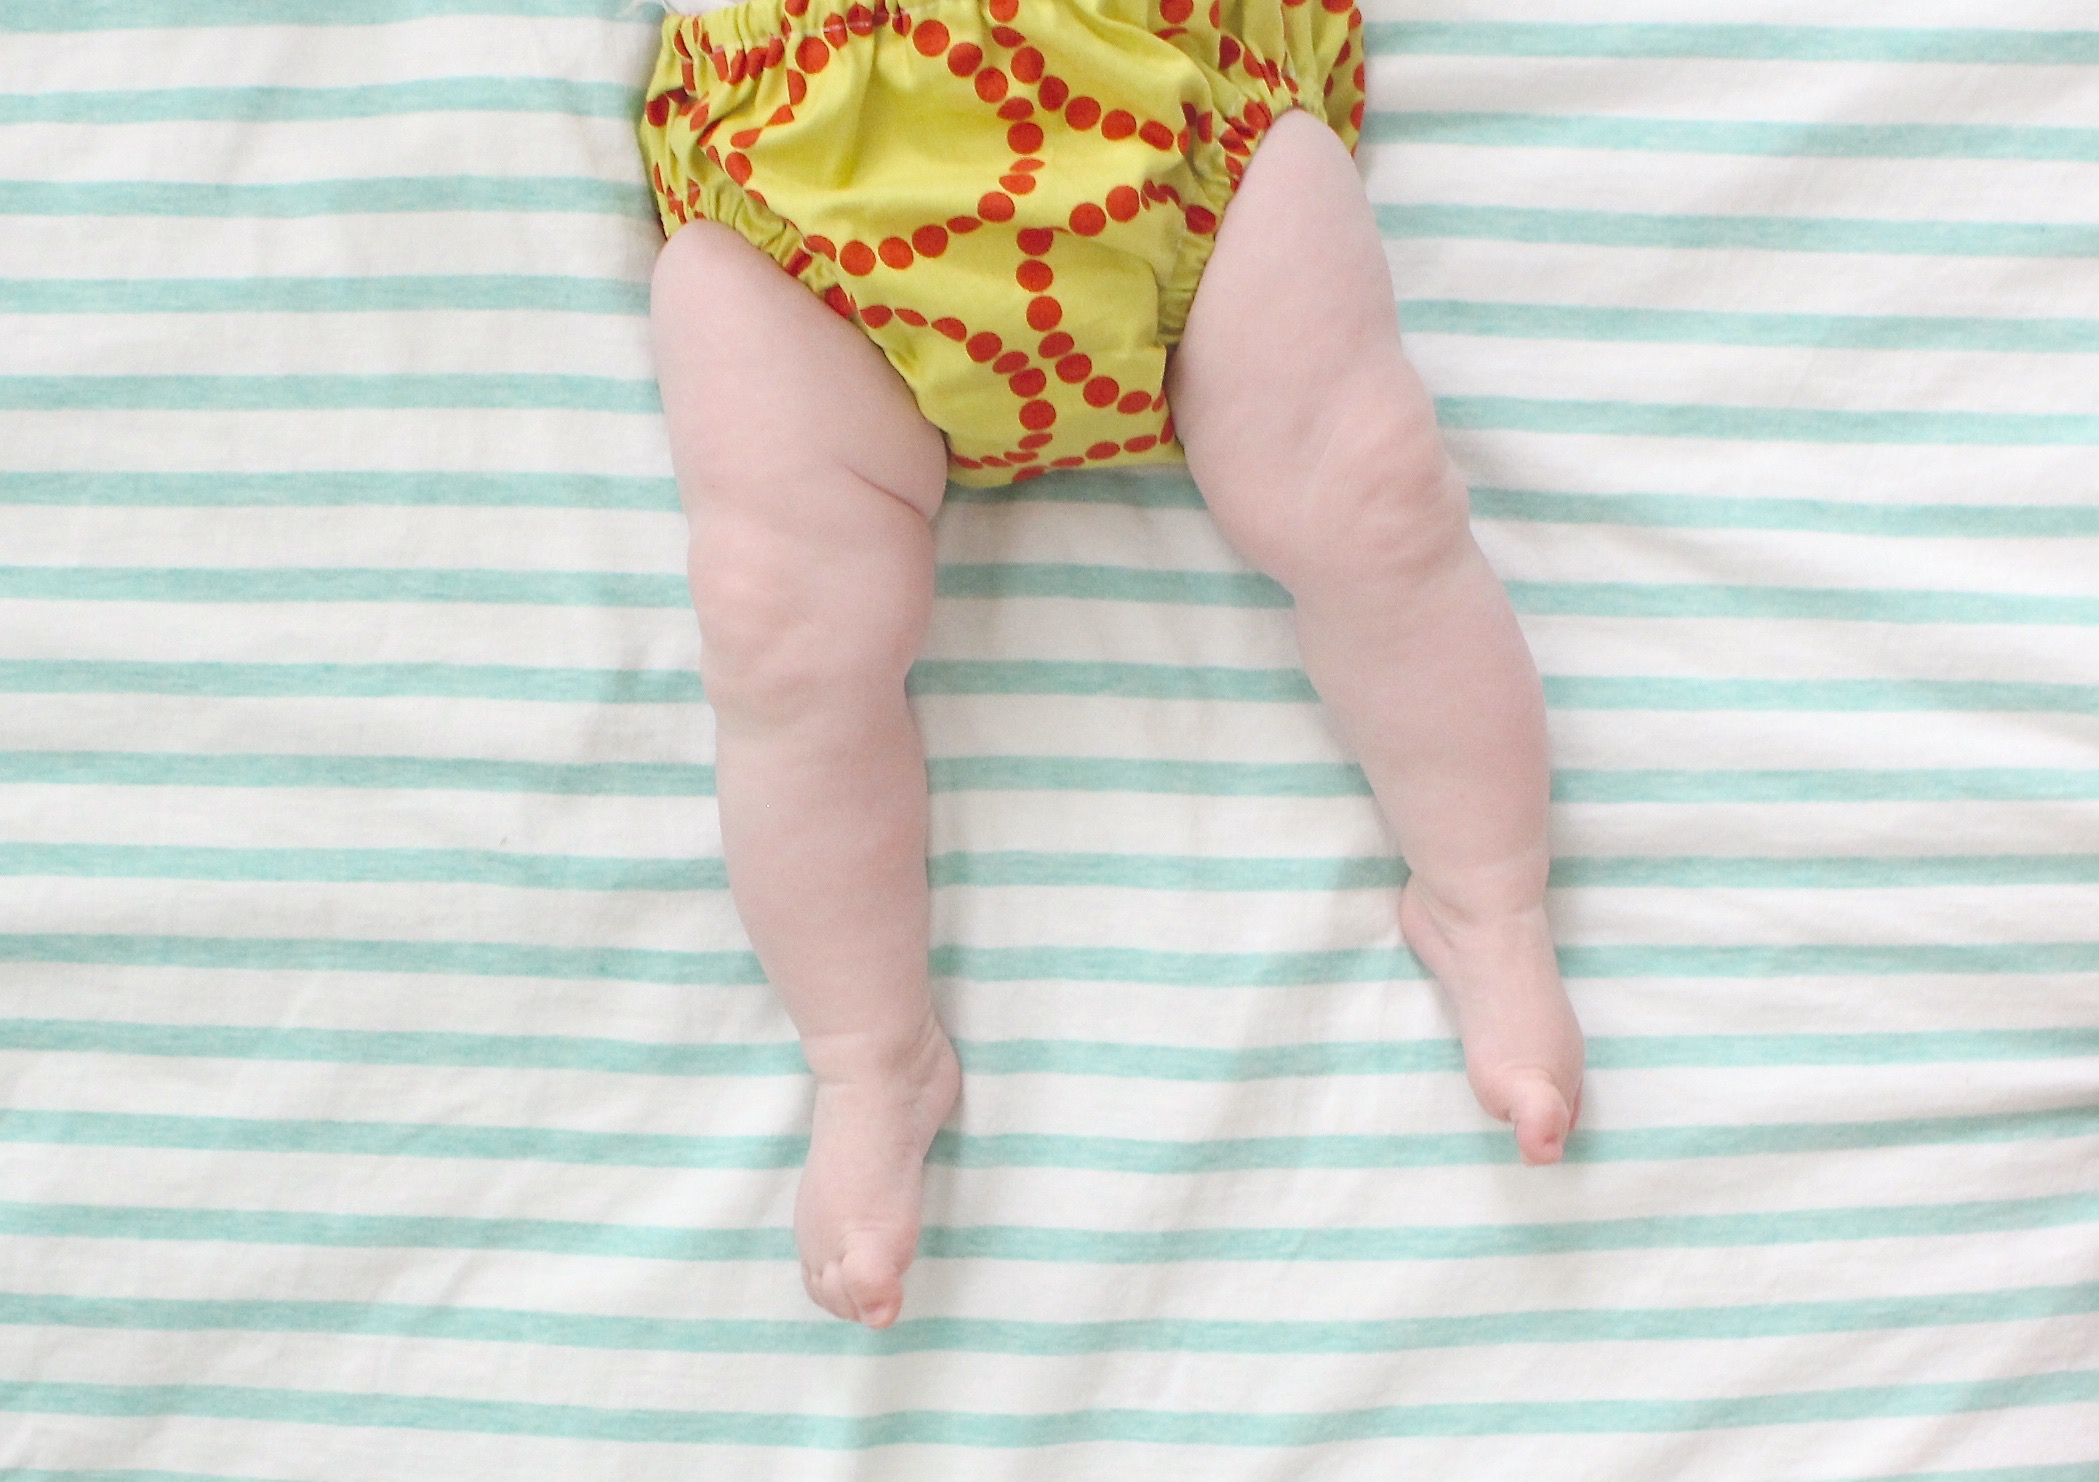  Ruffled Baby Bloomers, Diaper Covers - Making